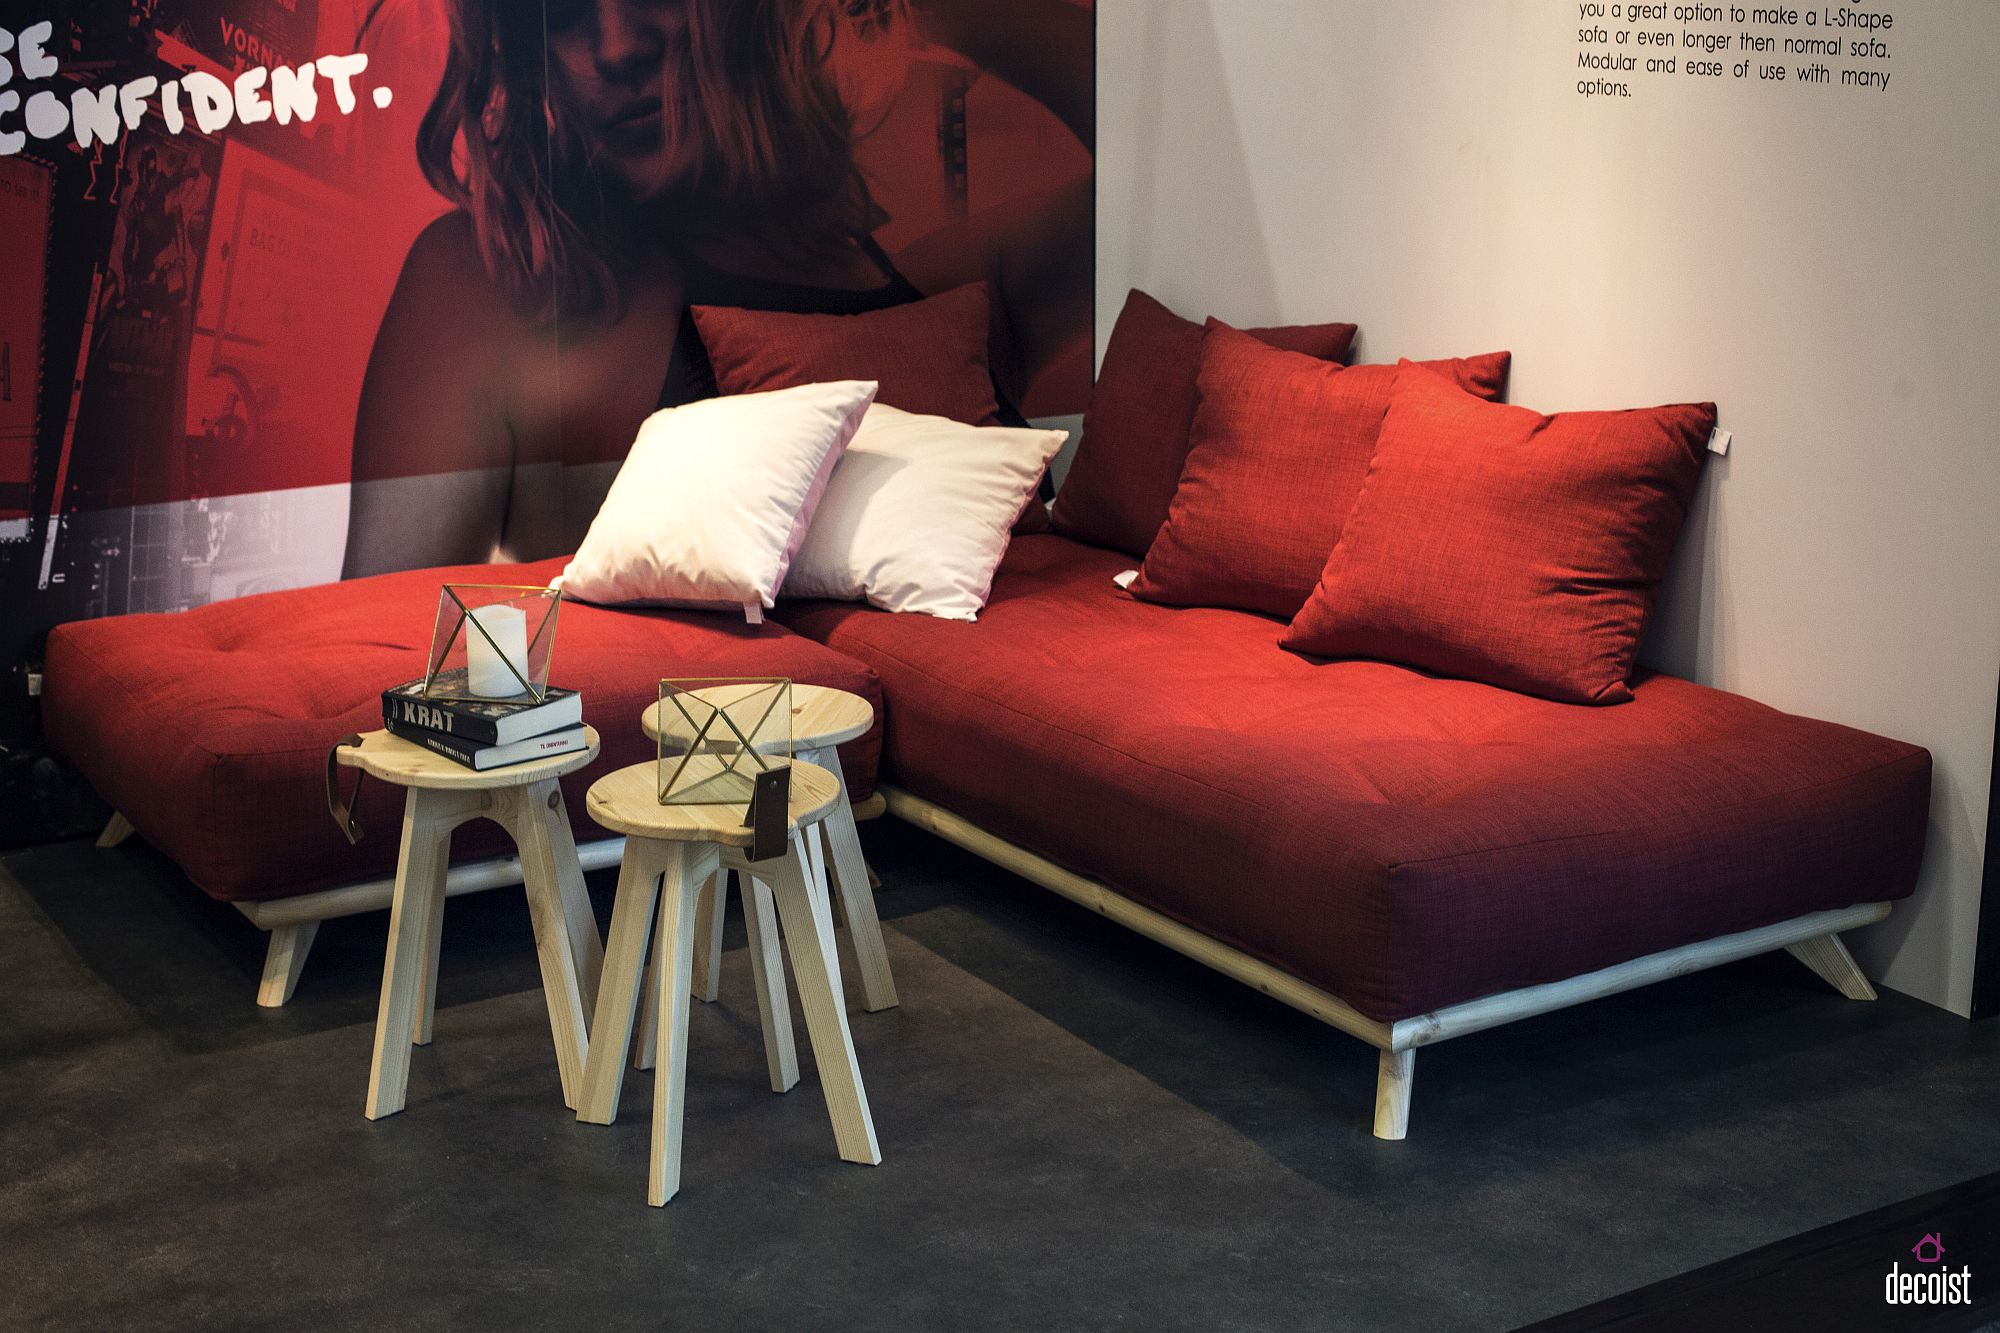 Senza-from-Karup-combines-the-sofa-and-chaise-lounge-into-one